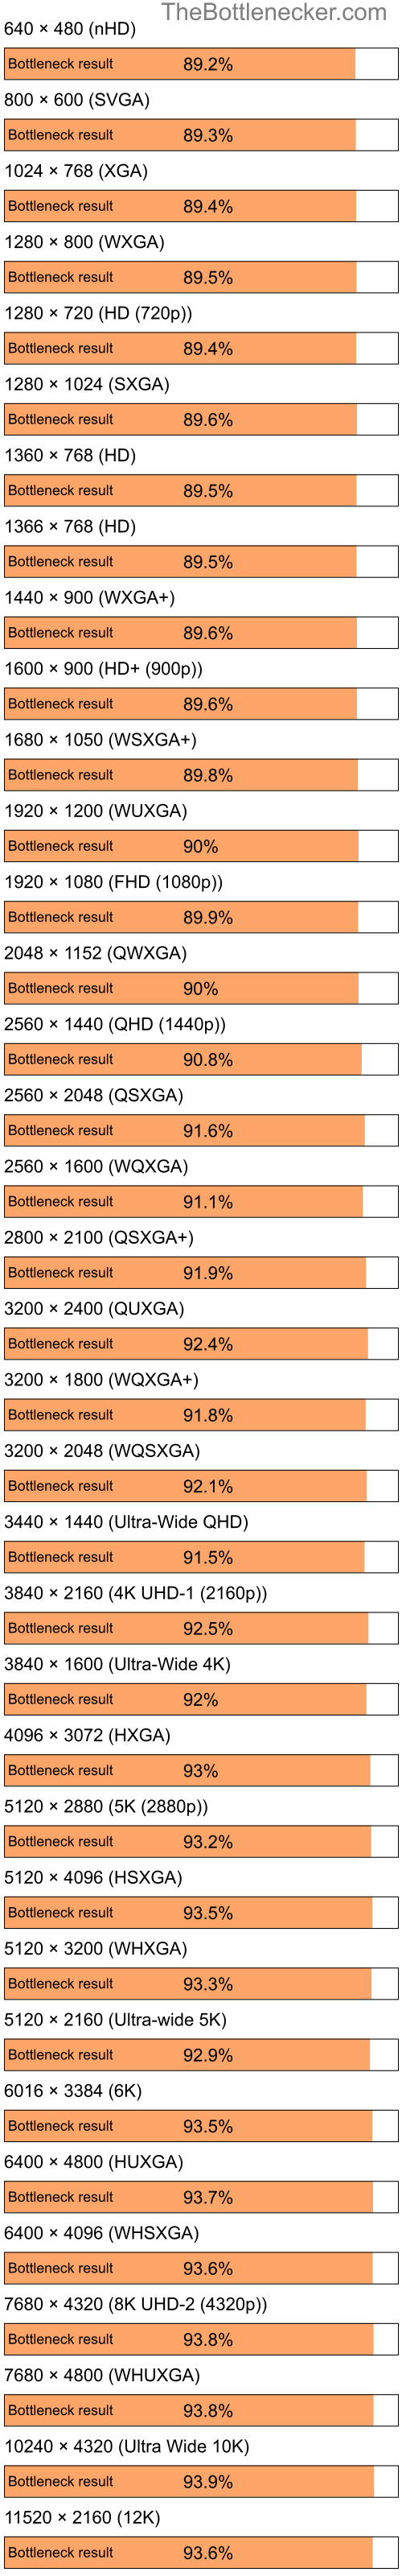 Bottleneck results by resolution for Intel Pentium 4 and AMD Radeon 7000 in General Tasks